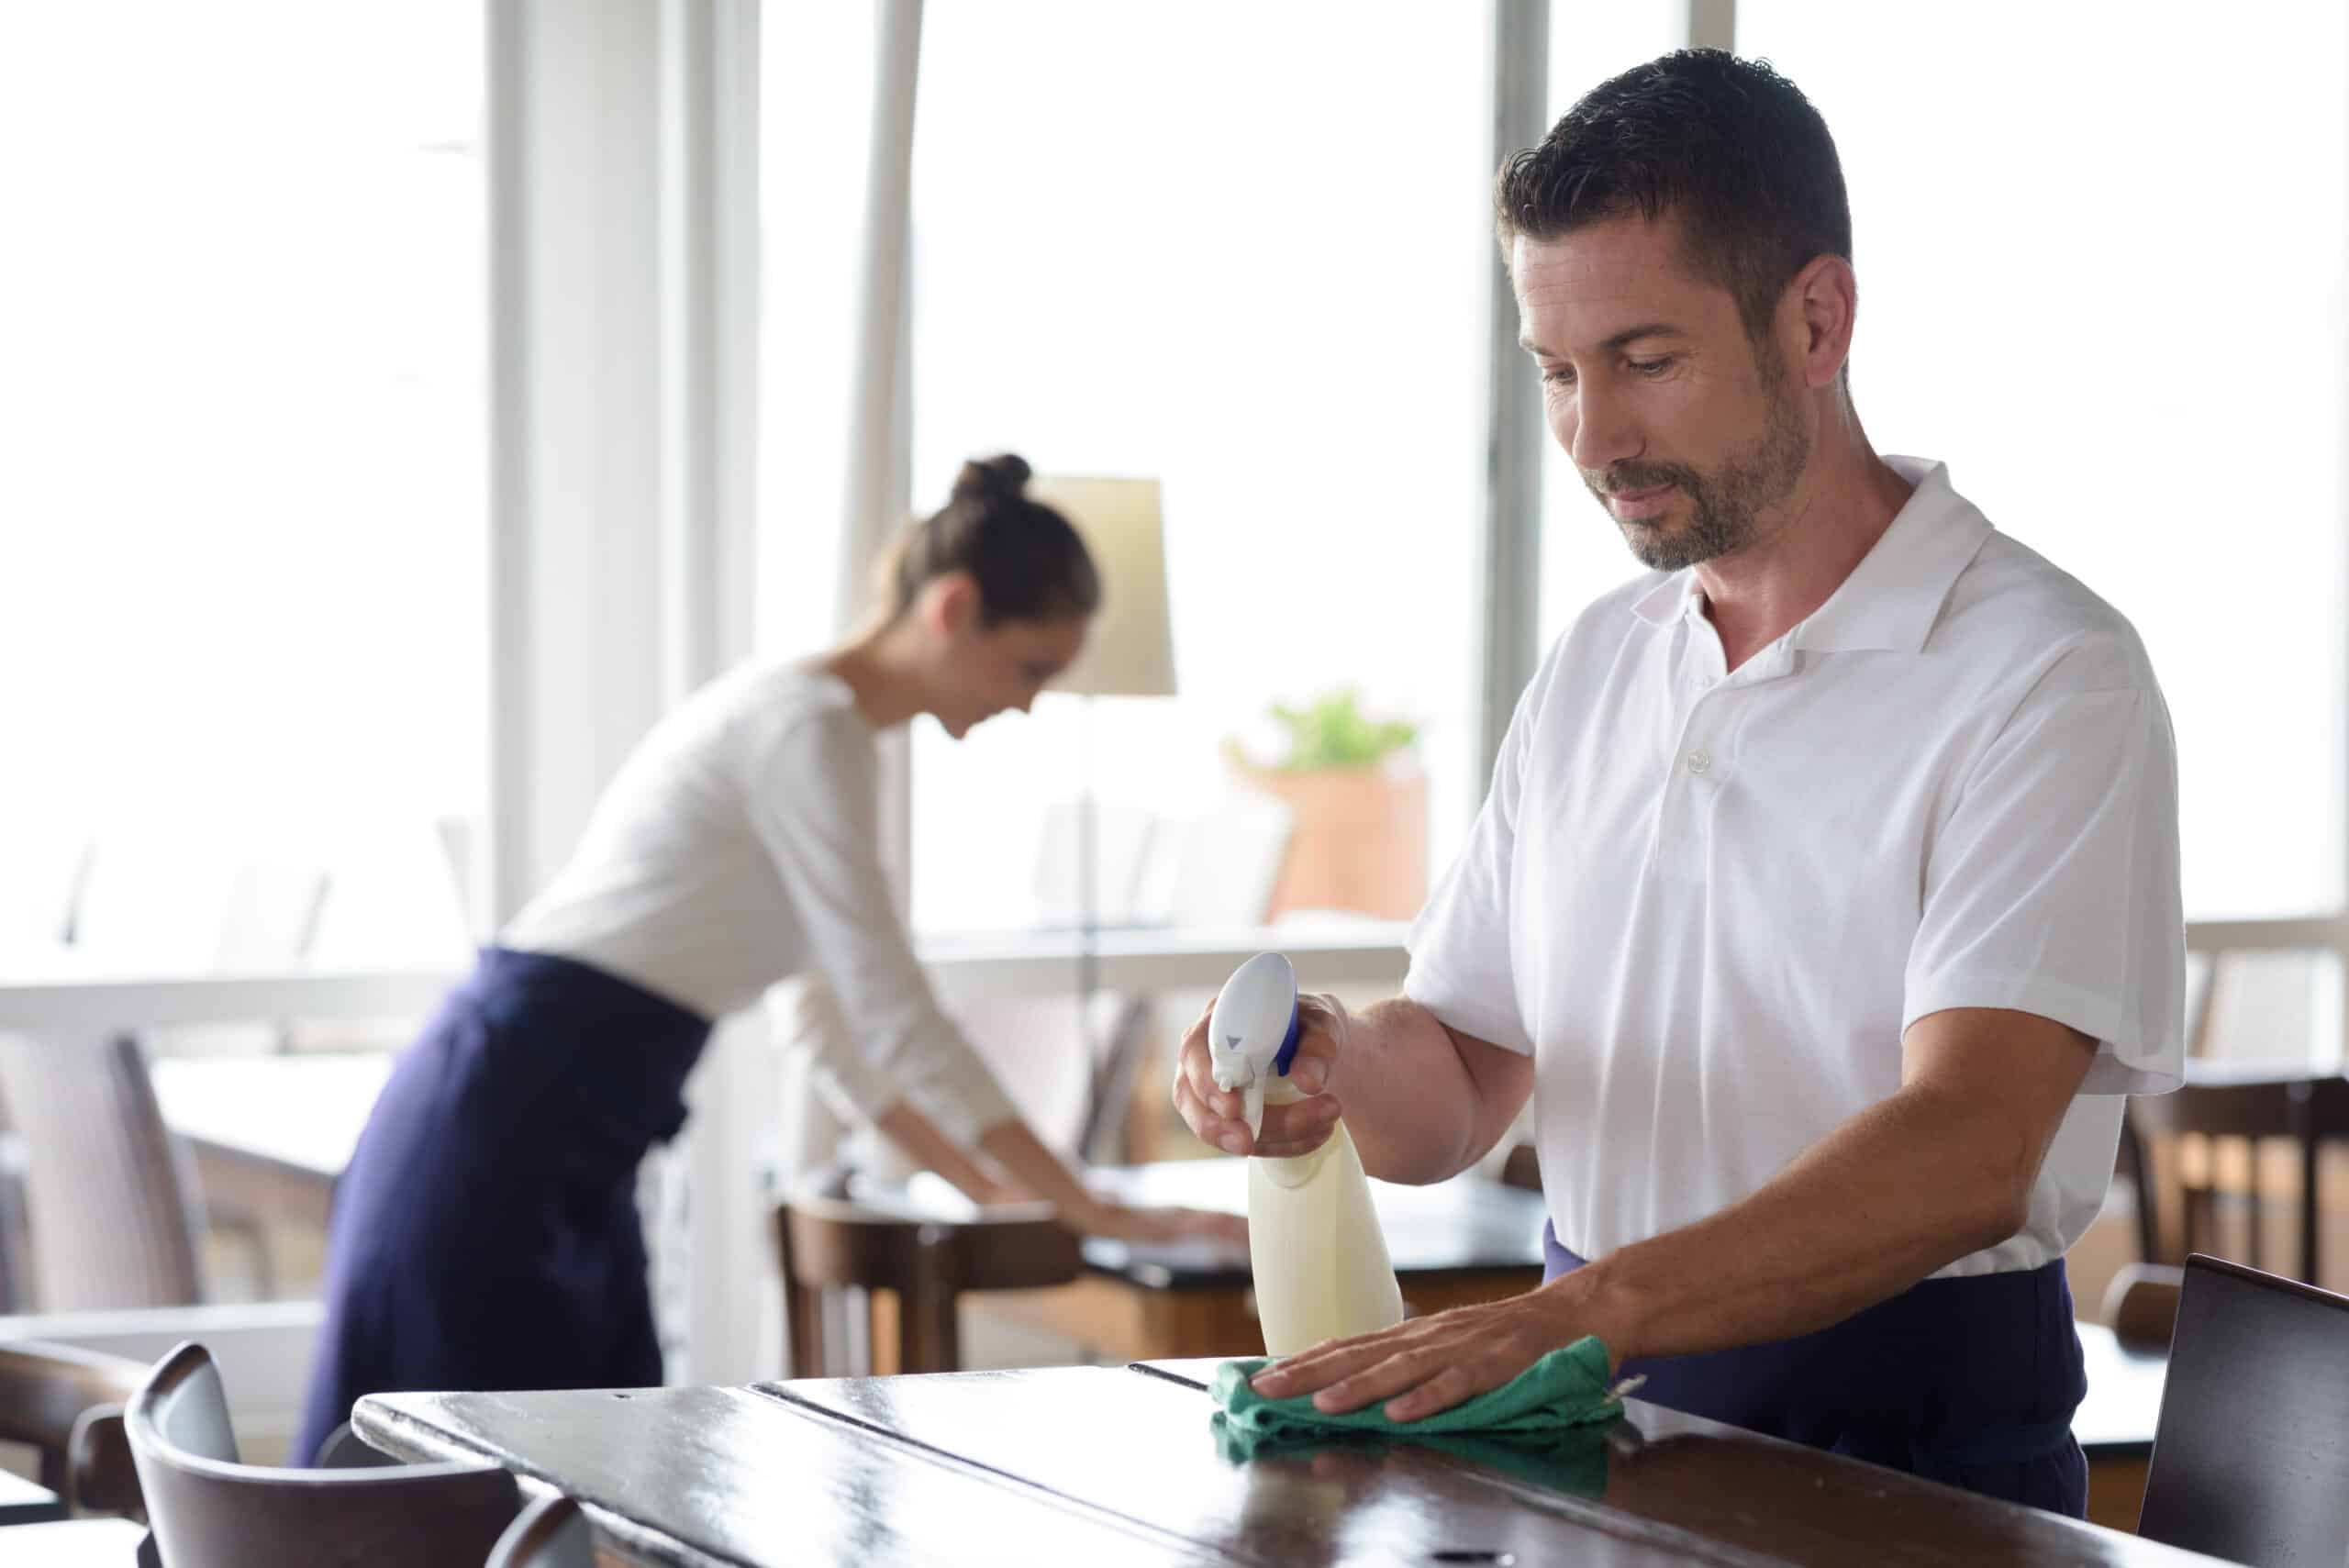 The Essential Restaurant Cleaning Checklist: A Step-by-Step Guide